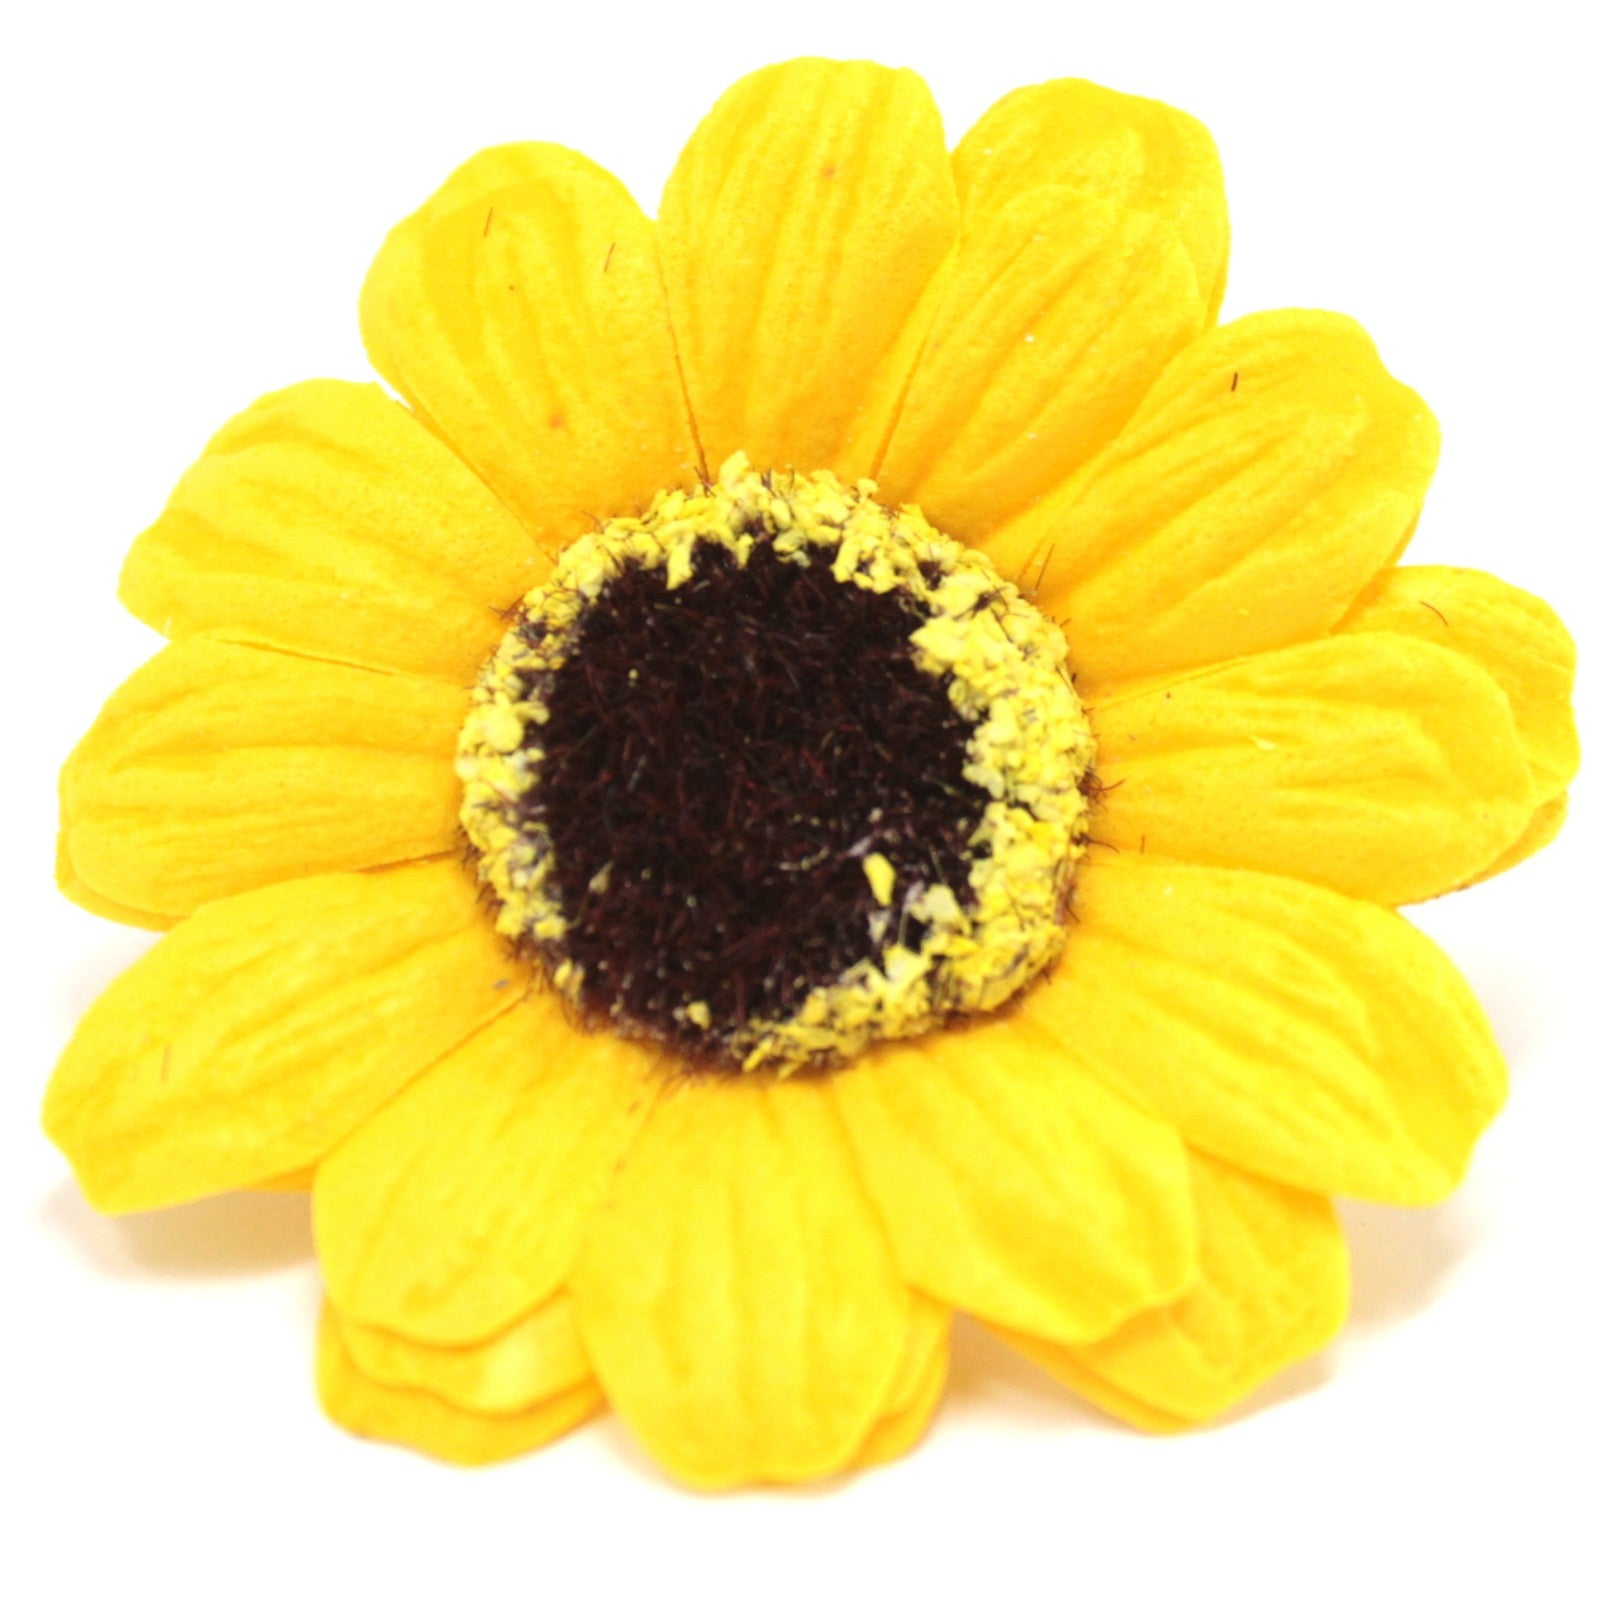 View Craft Soap Flowers Sml Sunflower Yellow x 10 pcs information